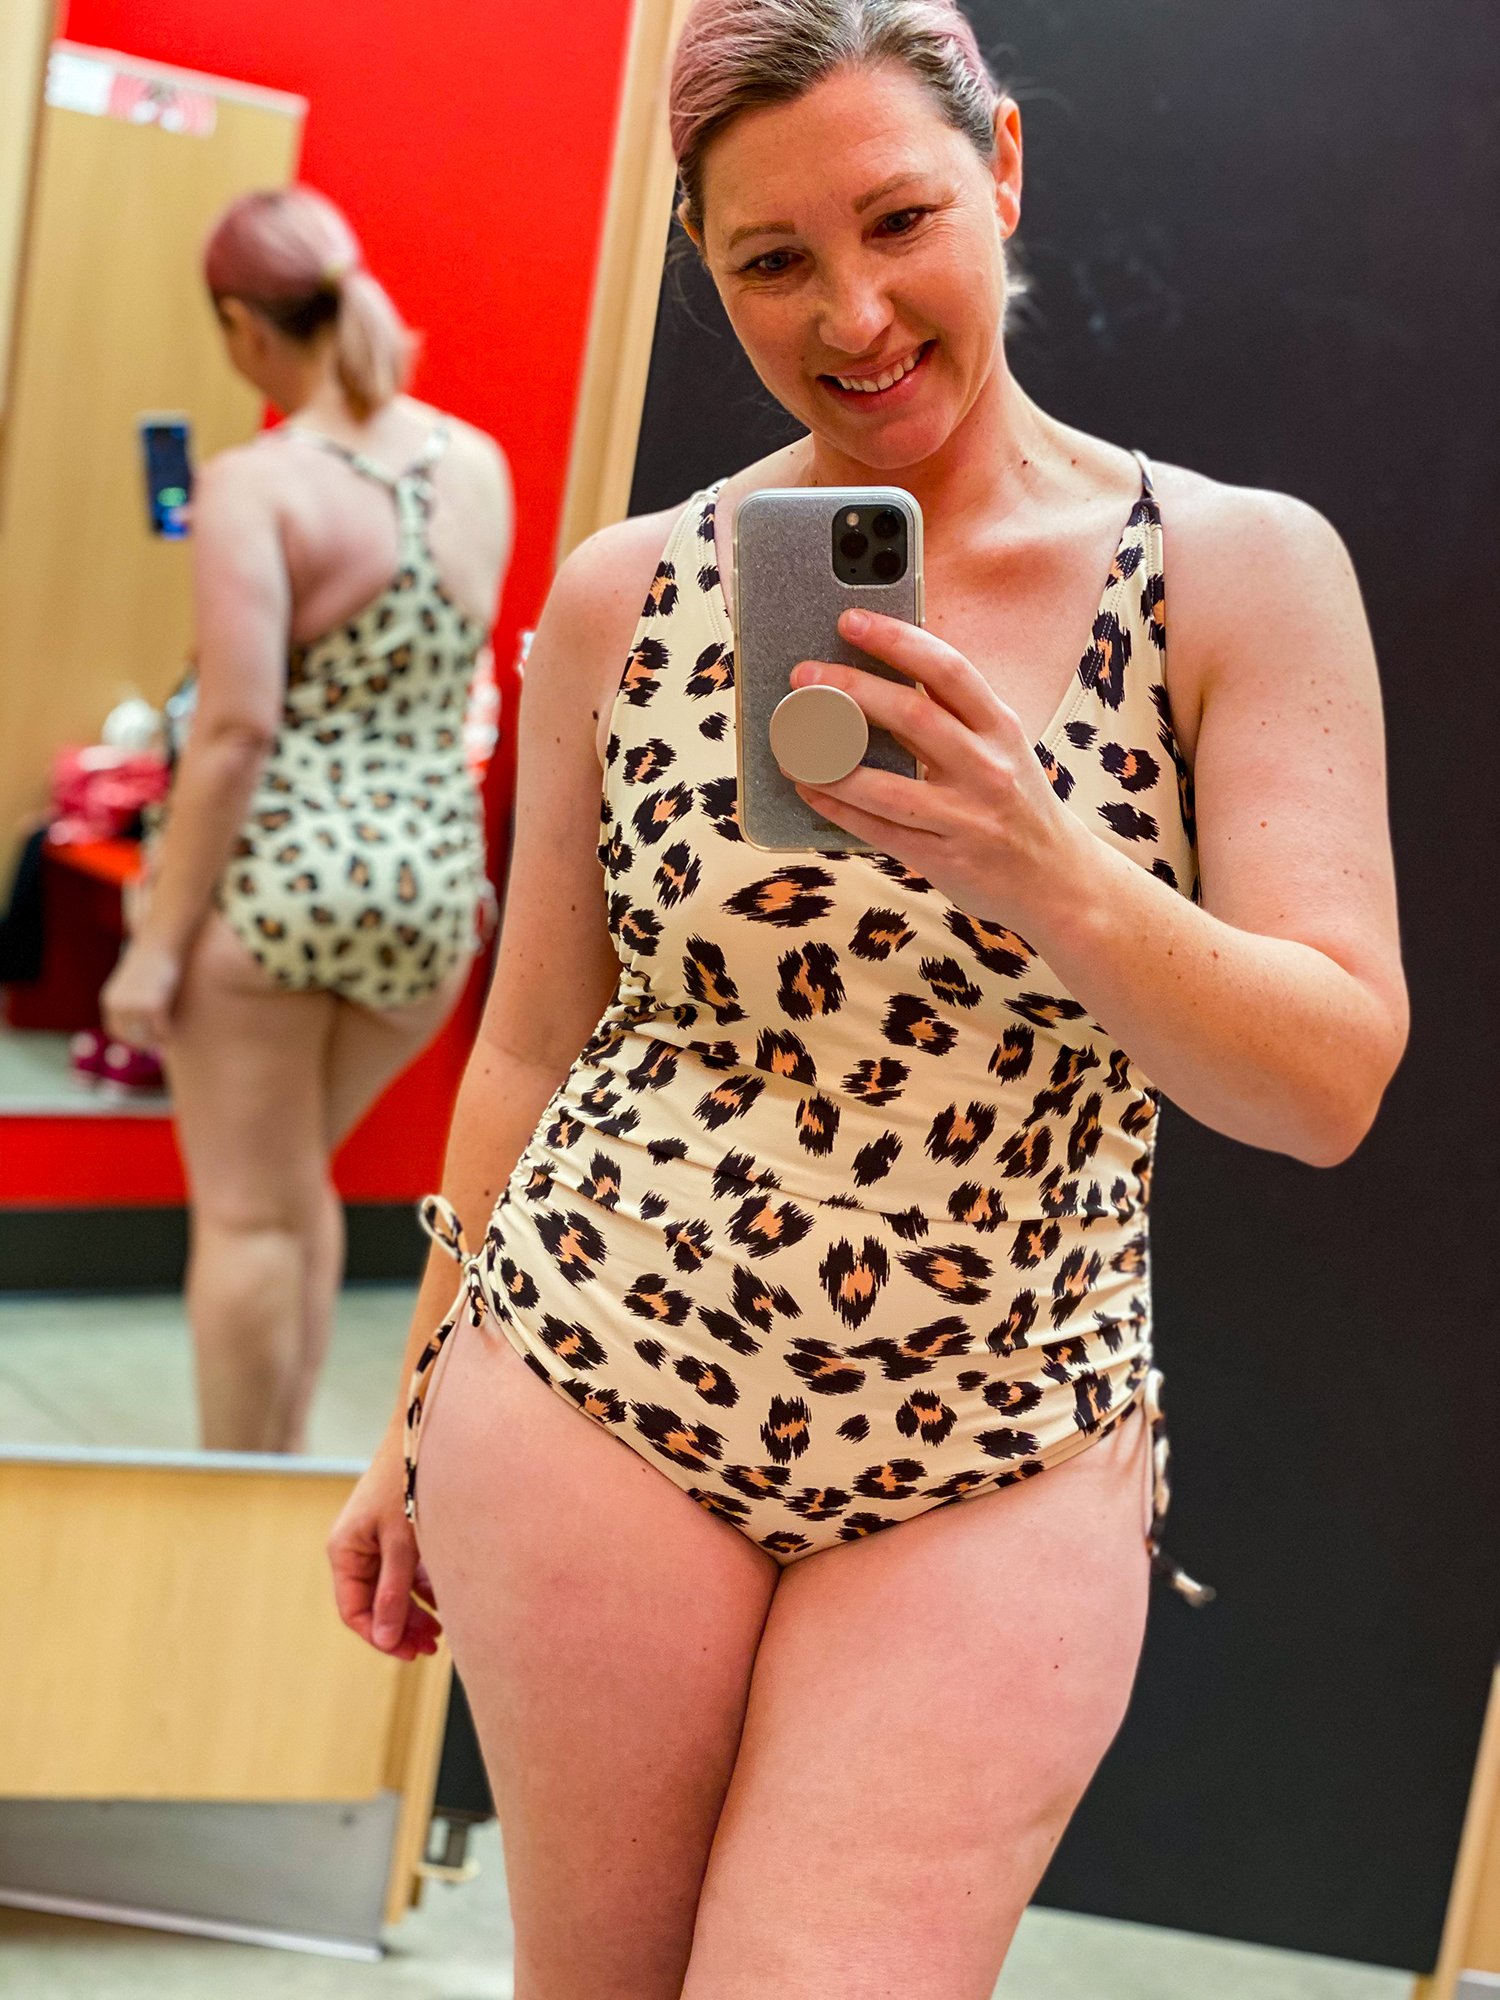 Who doesn't love a leopard print bathing suit? This Target swimsuit is adorable!